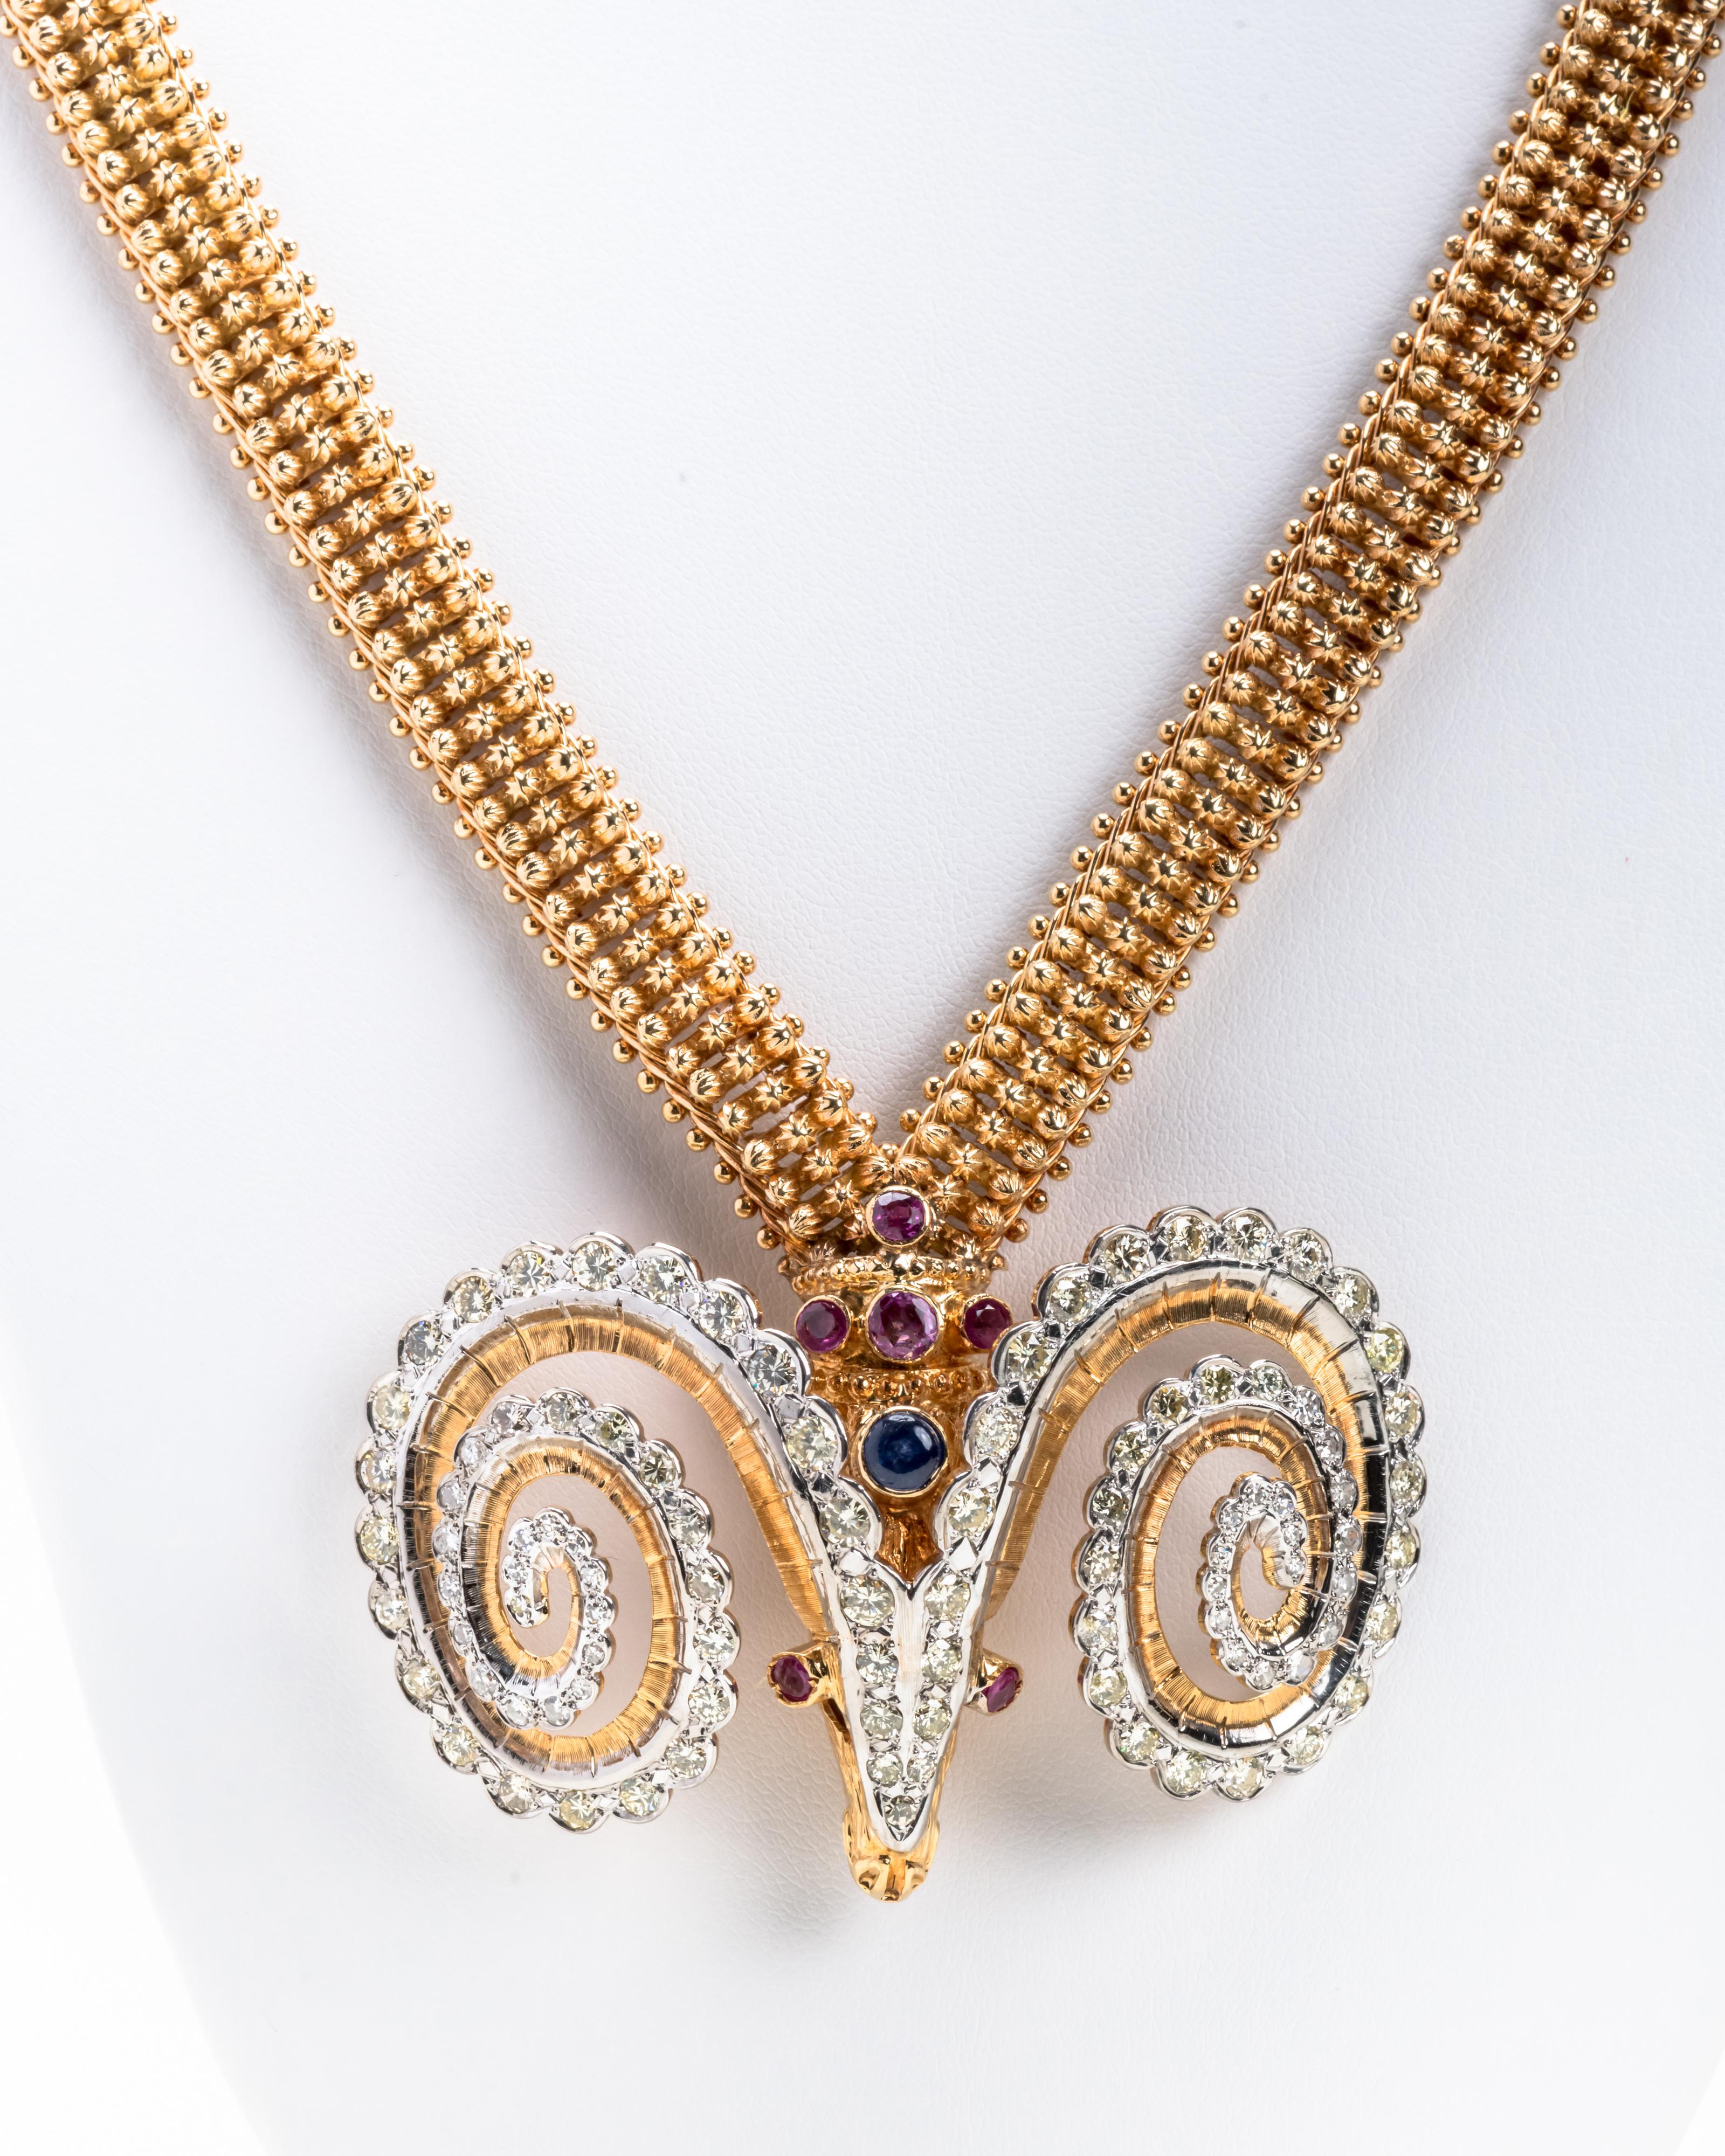 This beautiful 18 karat gold necklace has a highly stylized flexible chain and a prominent rams head pendant inset with diamonds, rubies and a Cabochon sapphire. The necklace is unique in it's design.

Size: L: 26